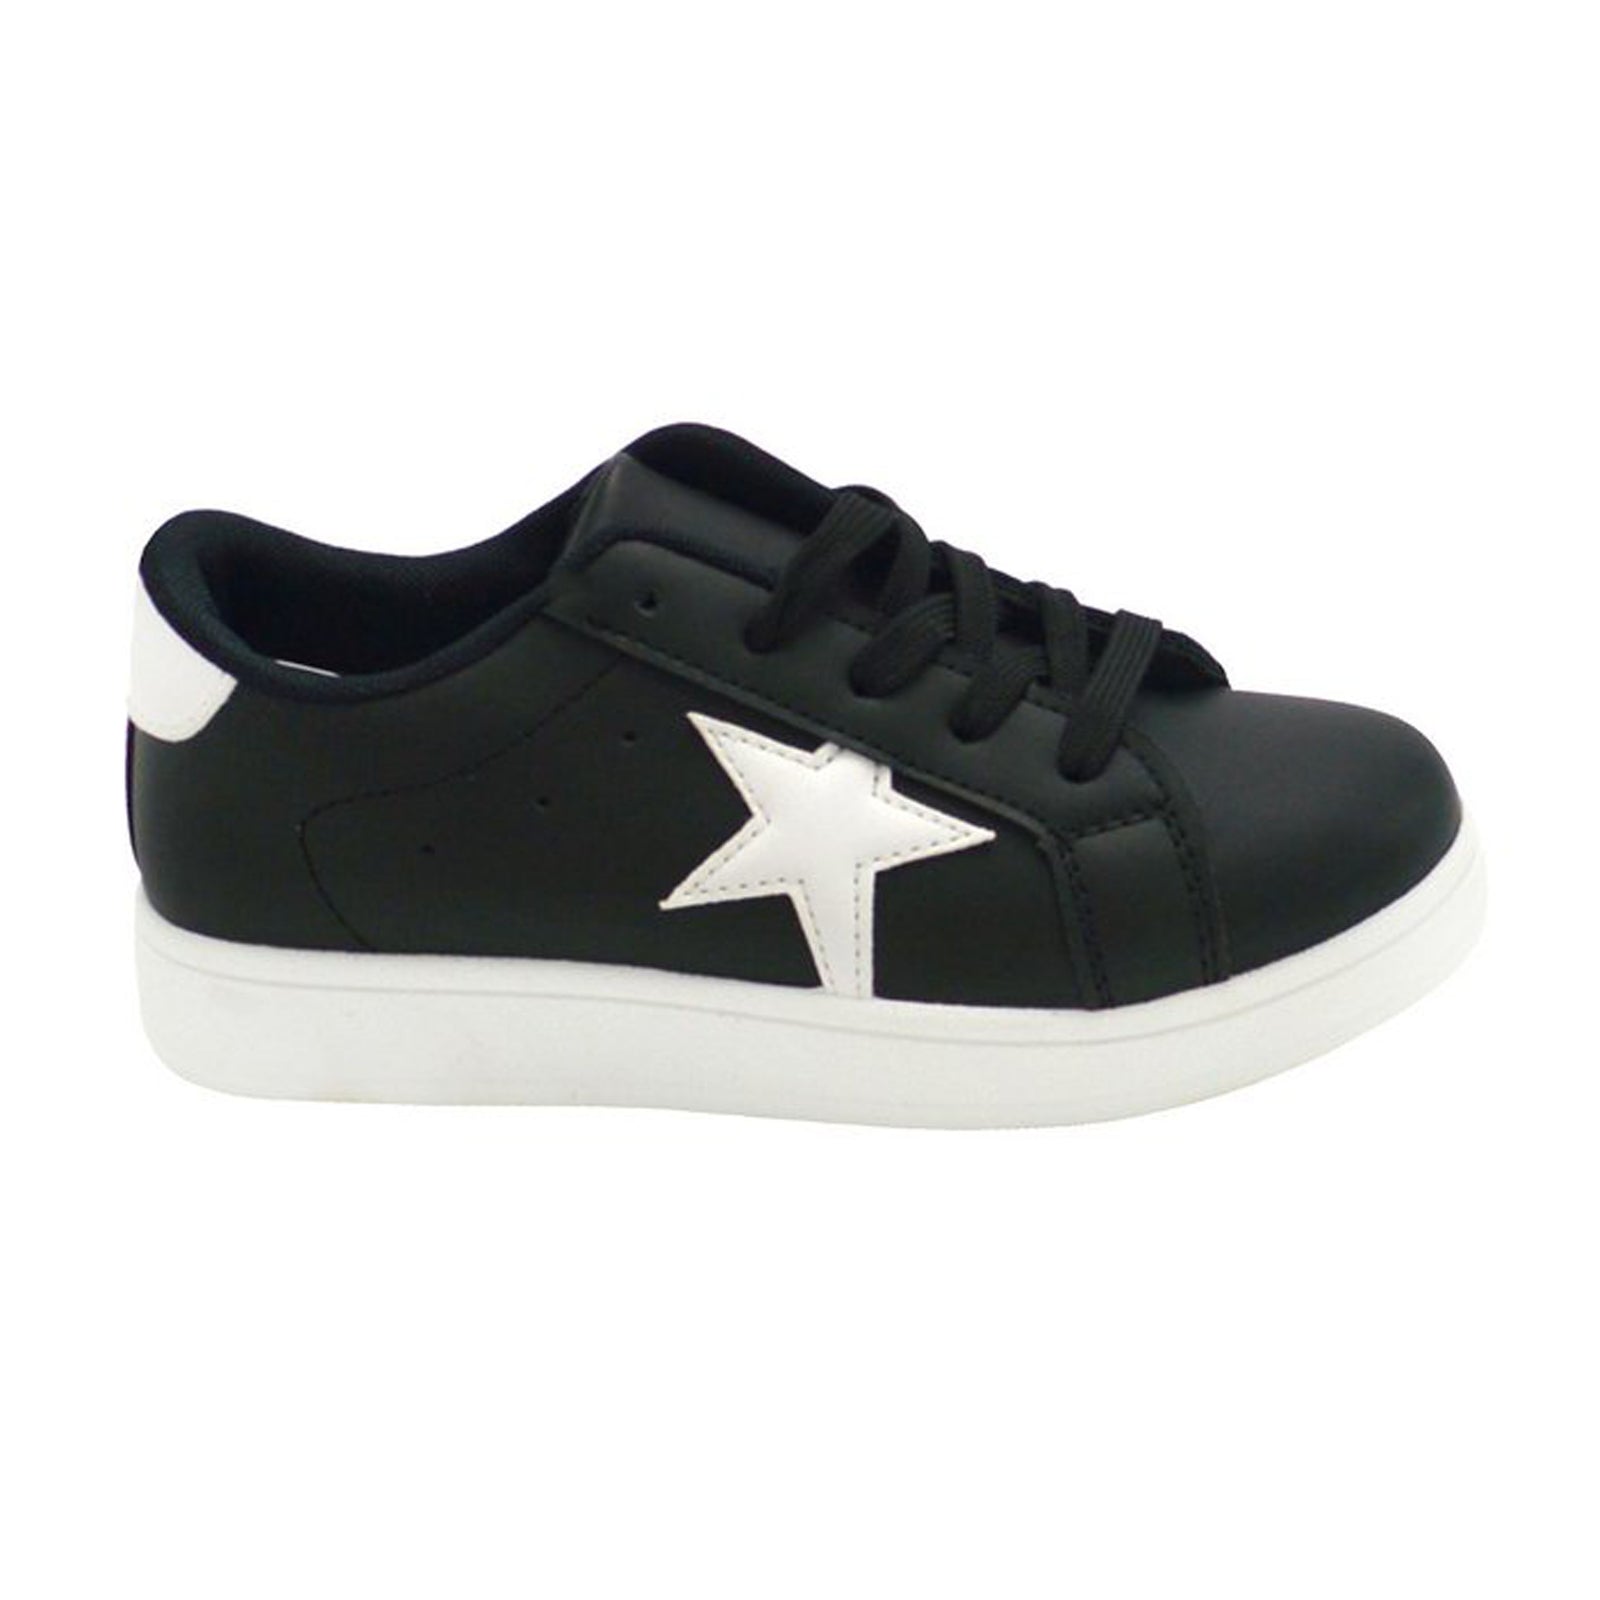 Wholesale Children's Shoes For Kids Sneakers Stars School NG2k